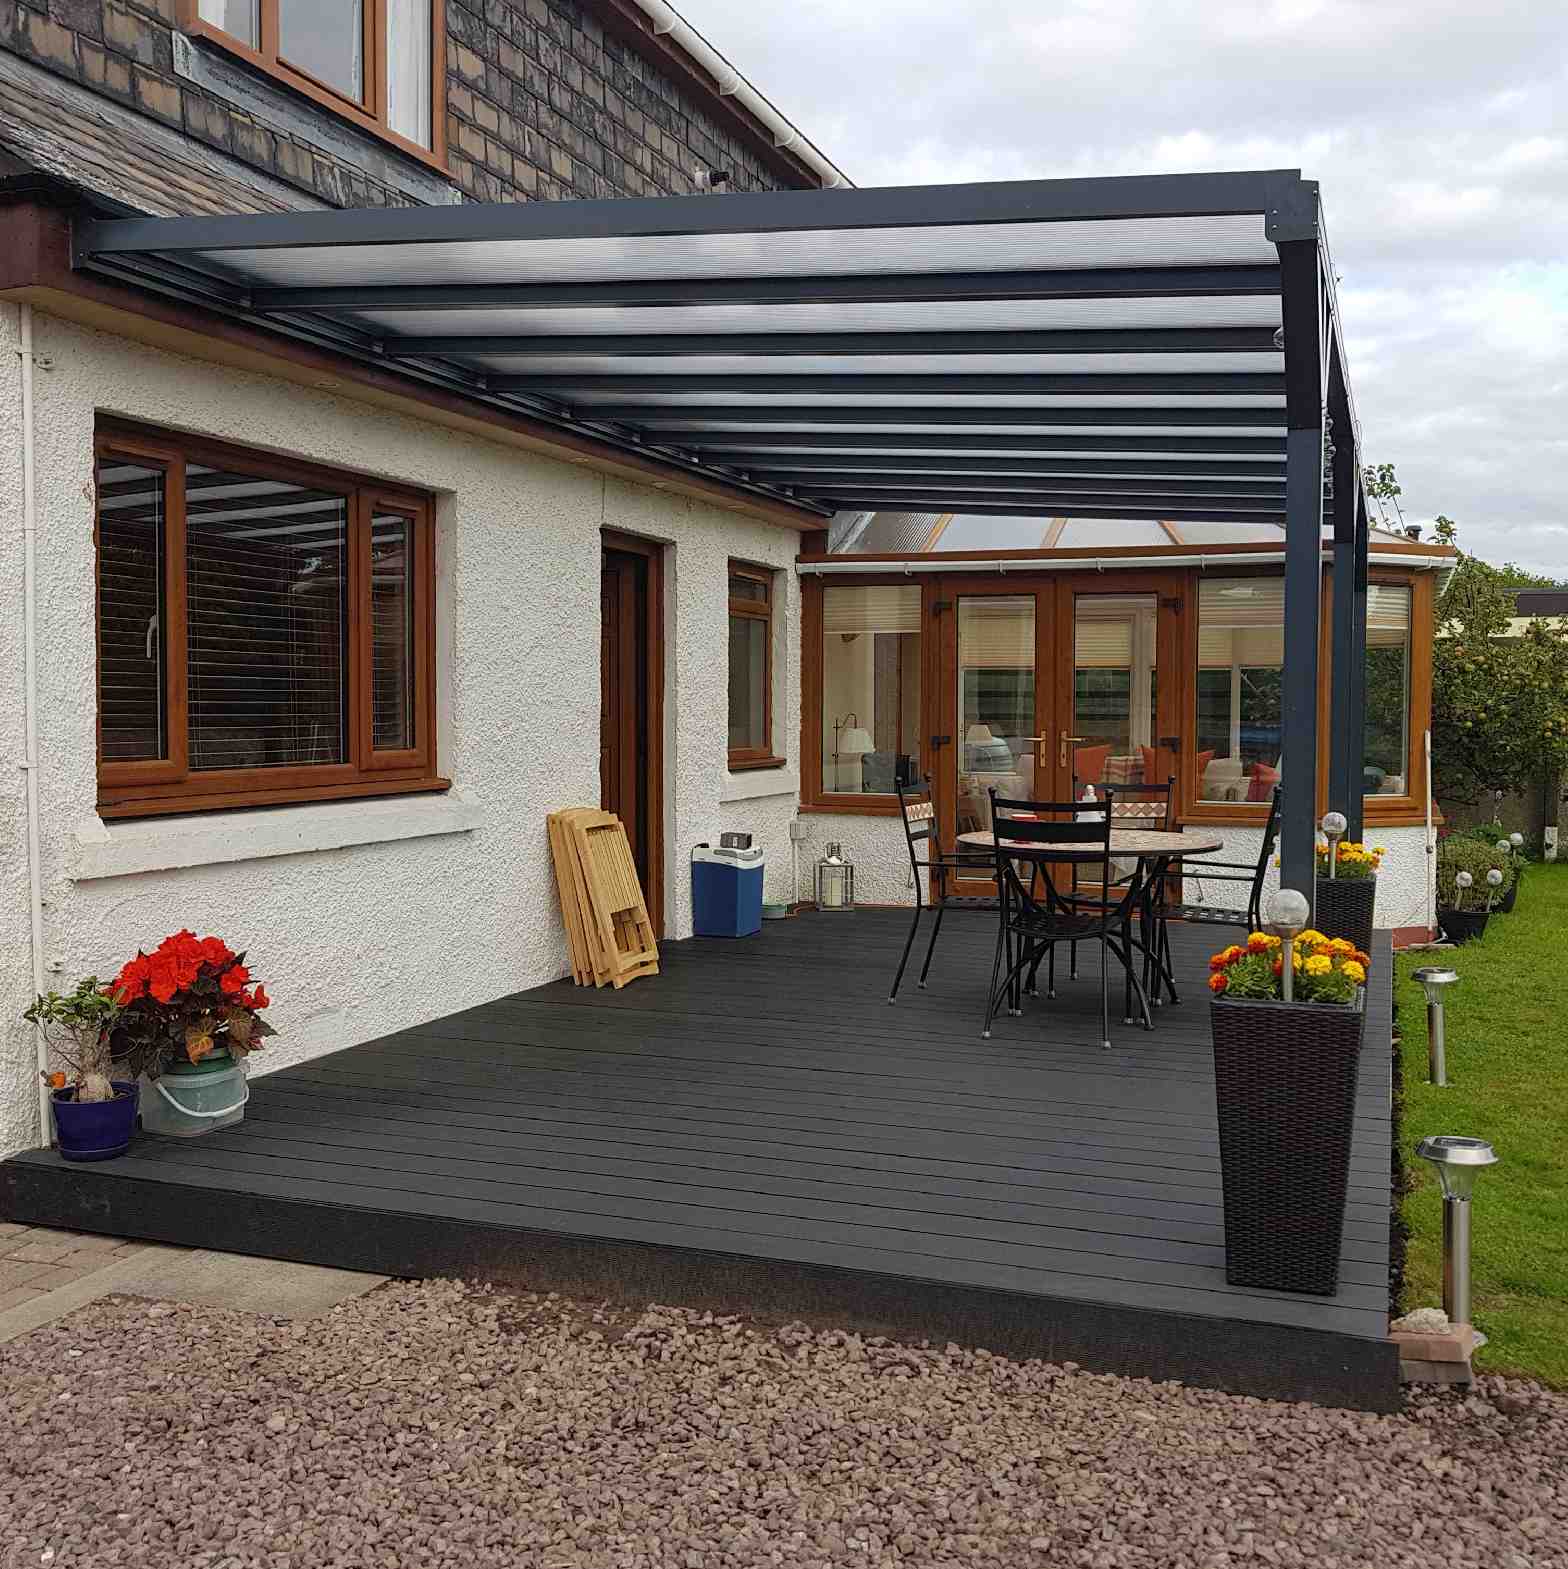 Buy Omega Verandah, Anthracite Grey, 6mm Glass Clear Plate Polycarbonate Glazing - 9.0m (W) x 4.0m (P), (4) Supporting Posts online today